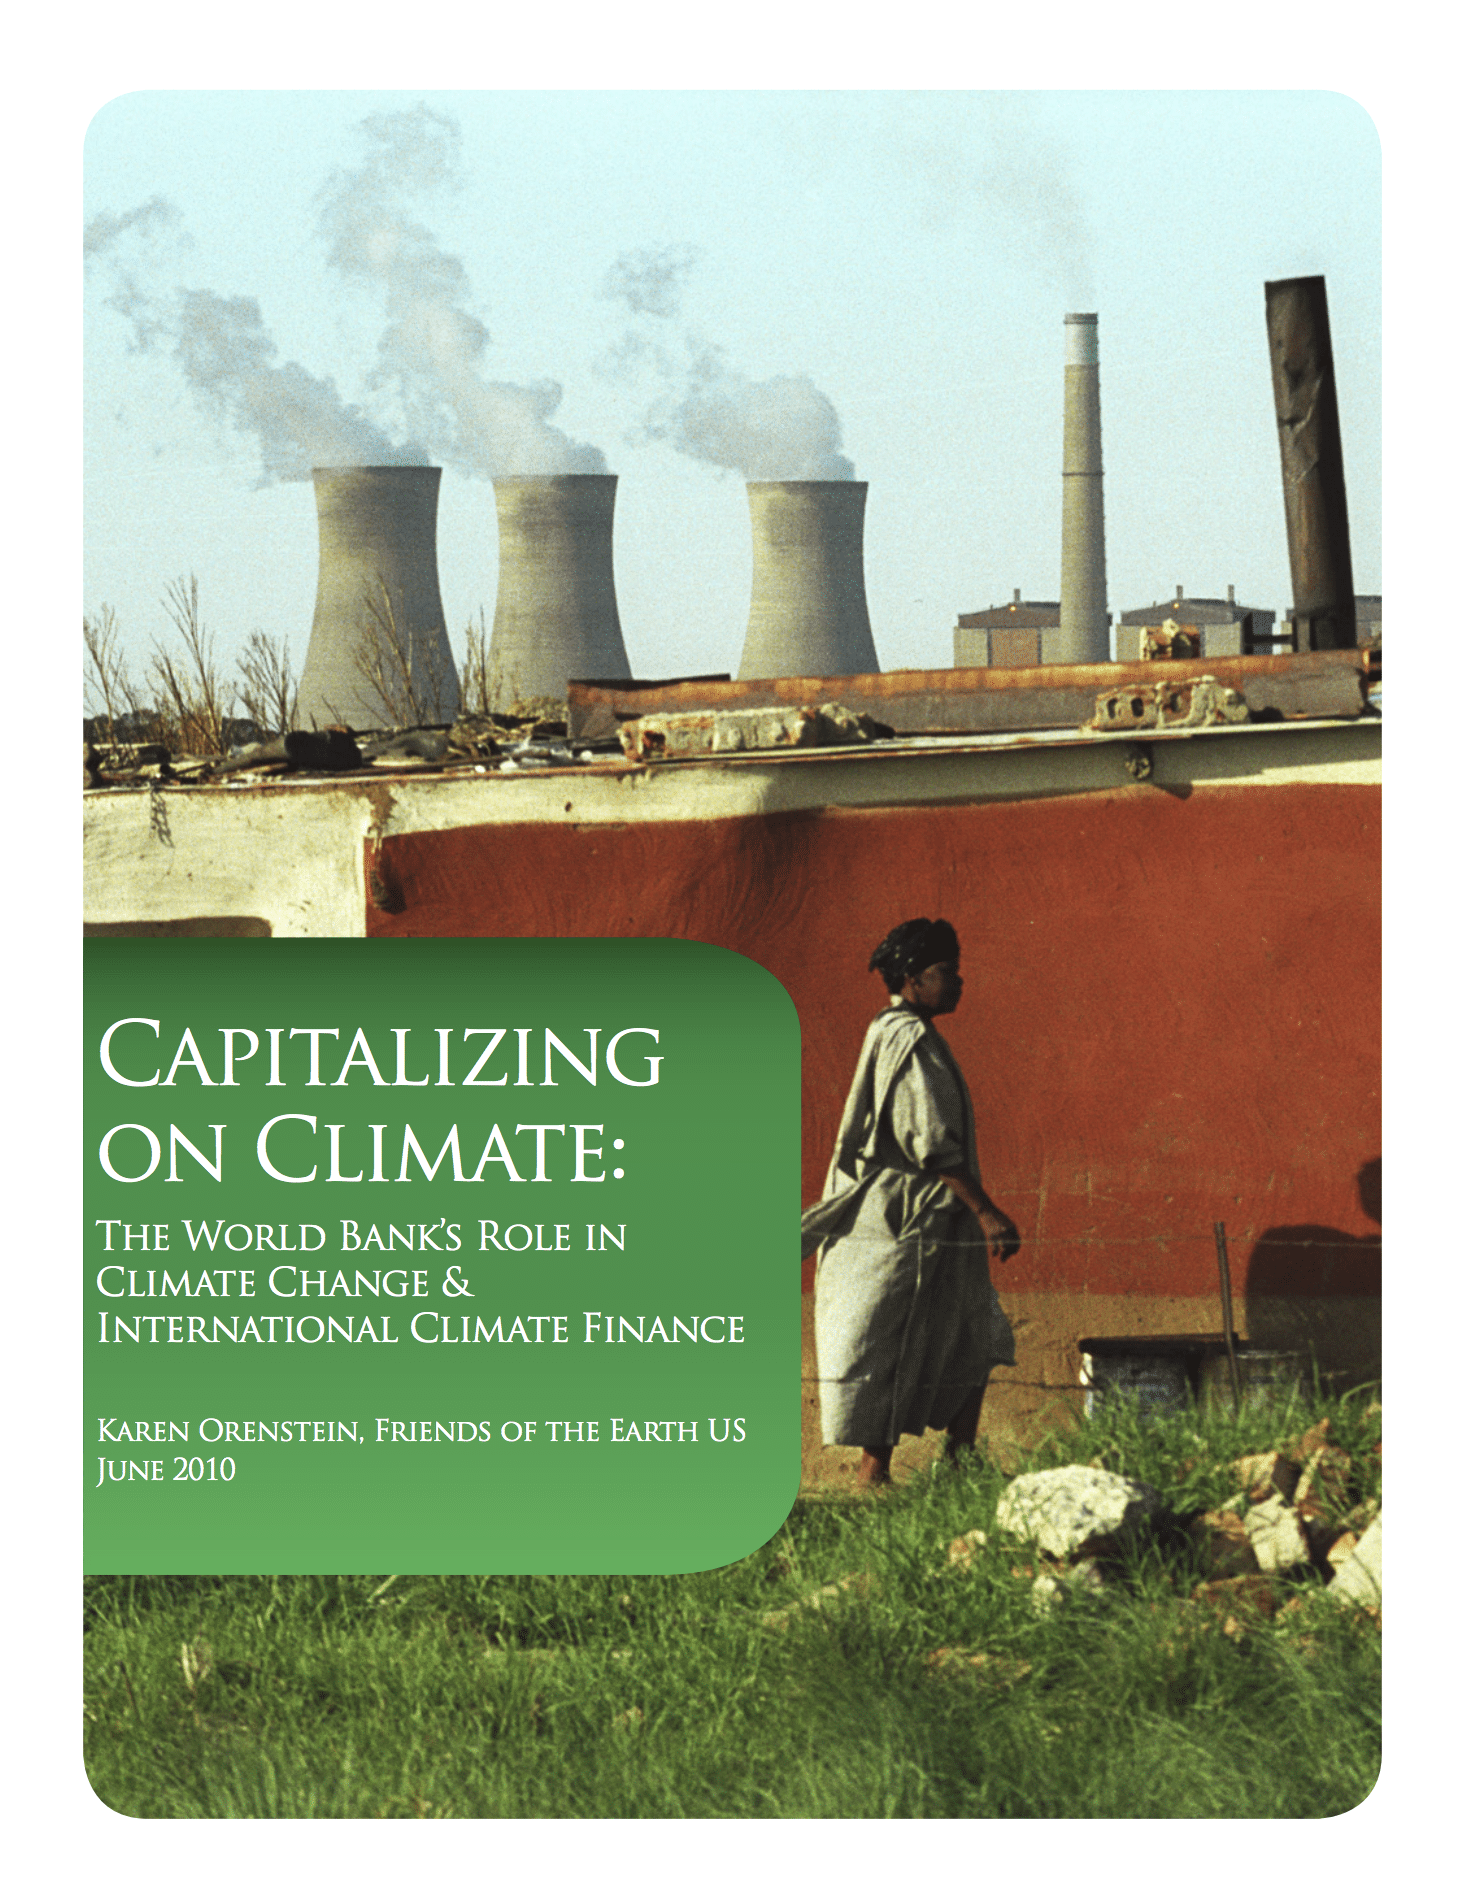 Capitalizing on climate: The World Bank’s role in climate change & international climate finance